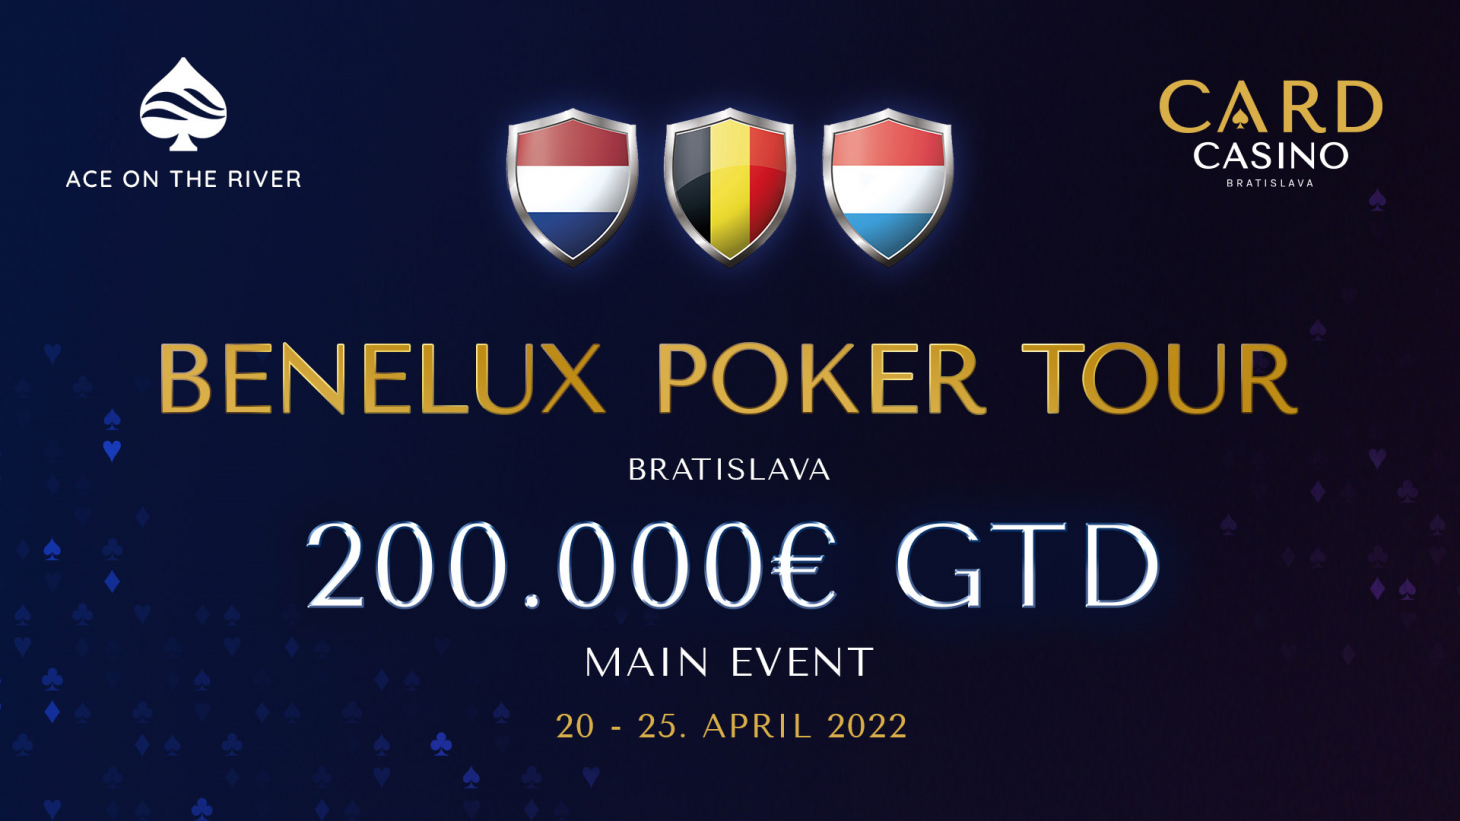 Benelux Poker Tour kicks off after Easter with €200,000 GTD Main Event